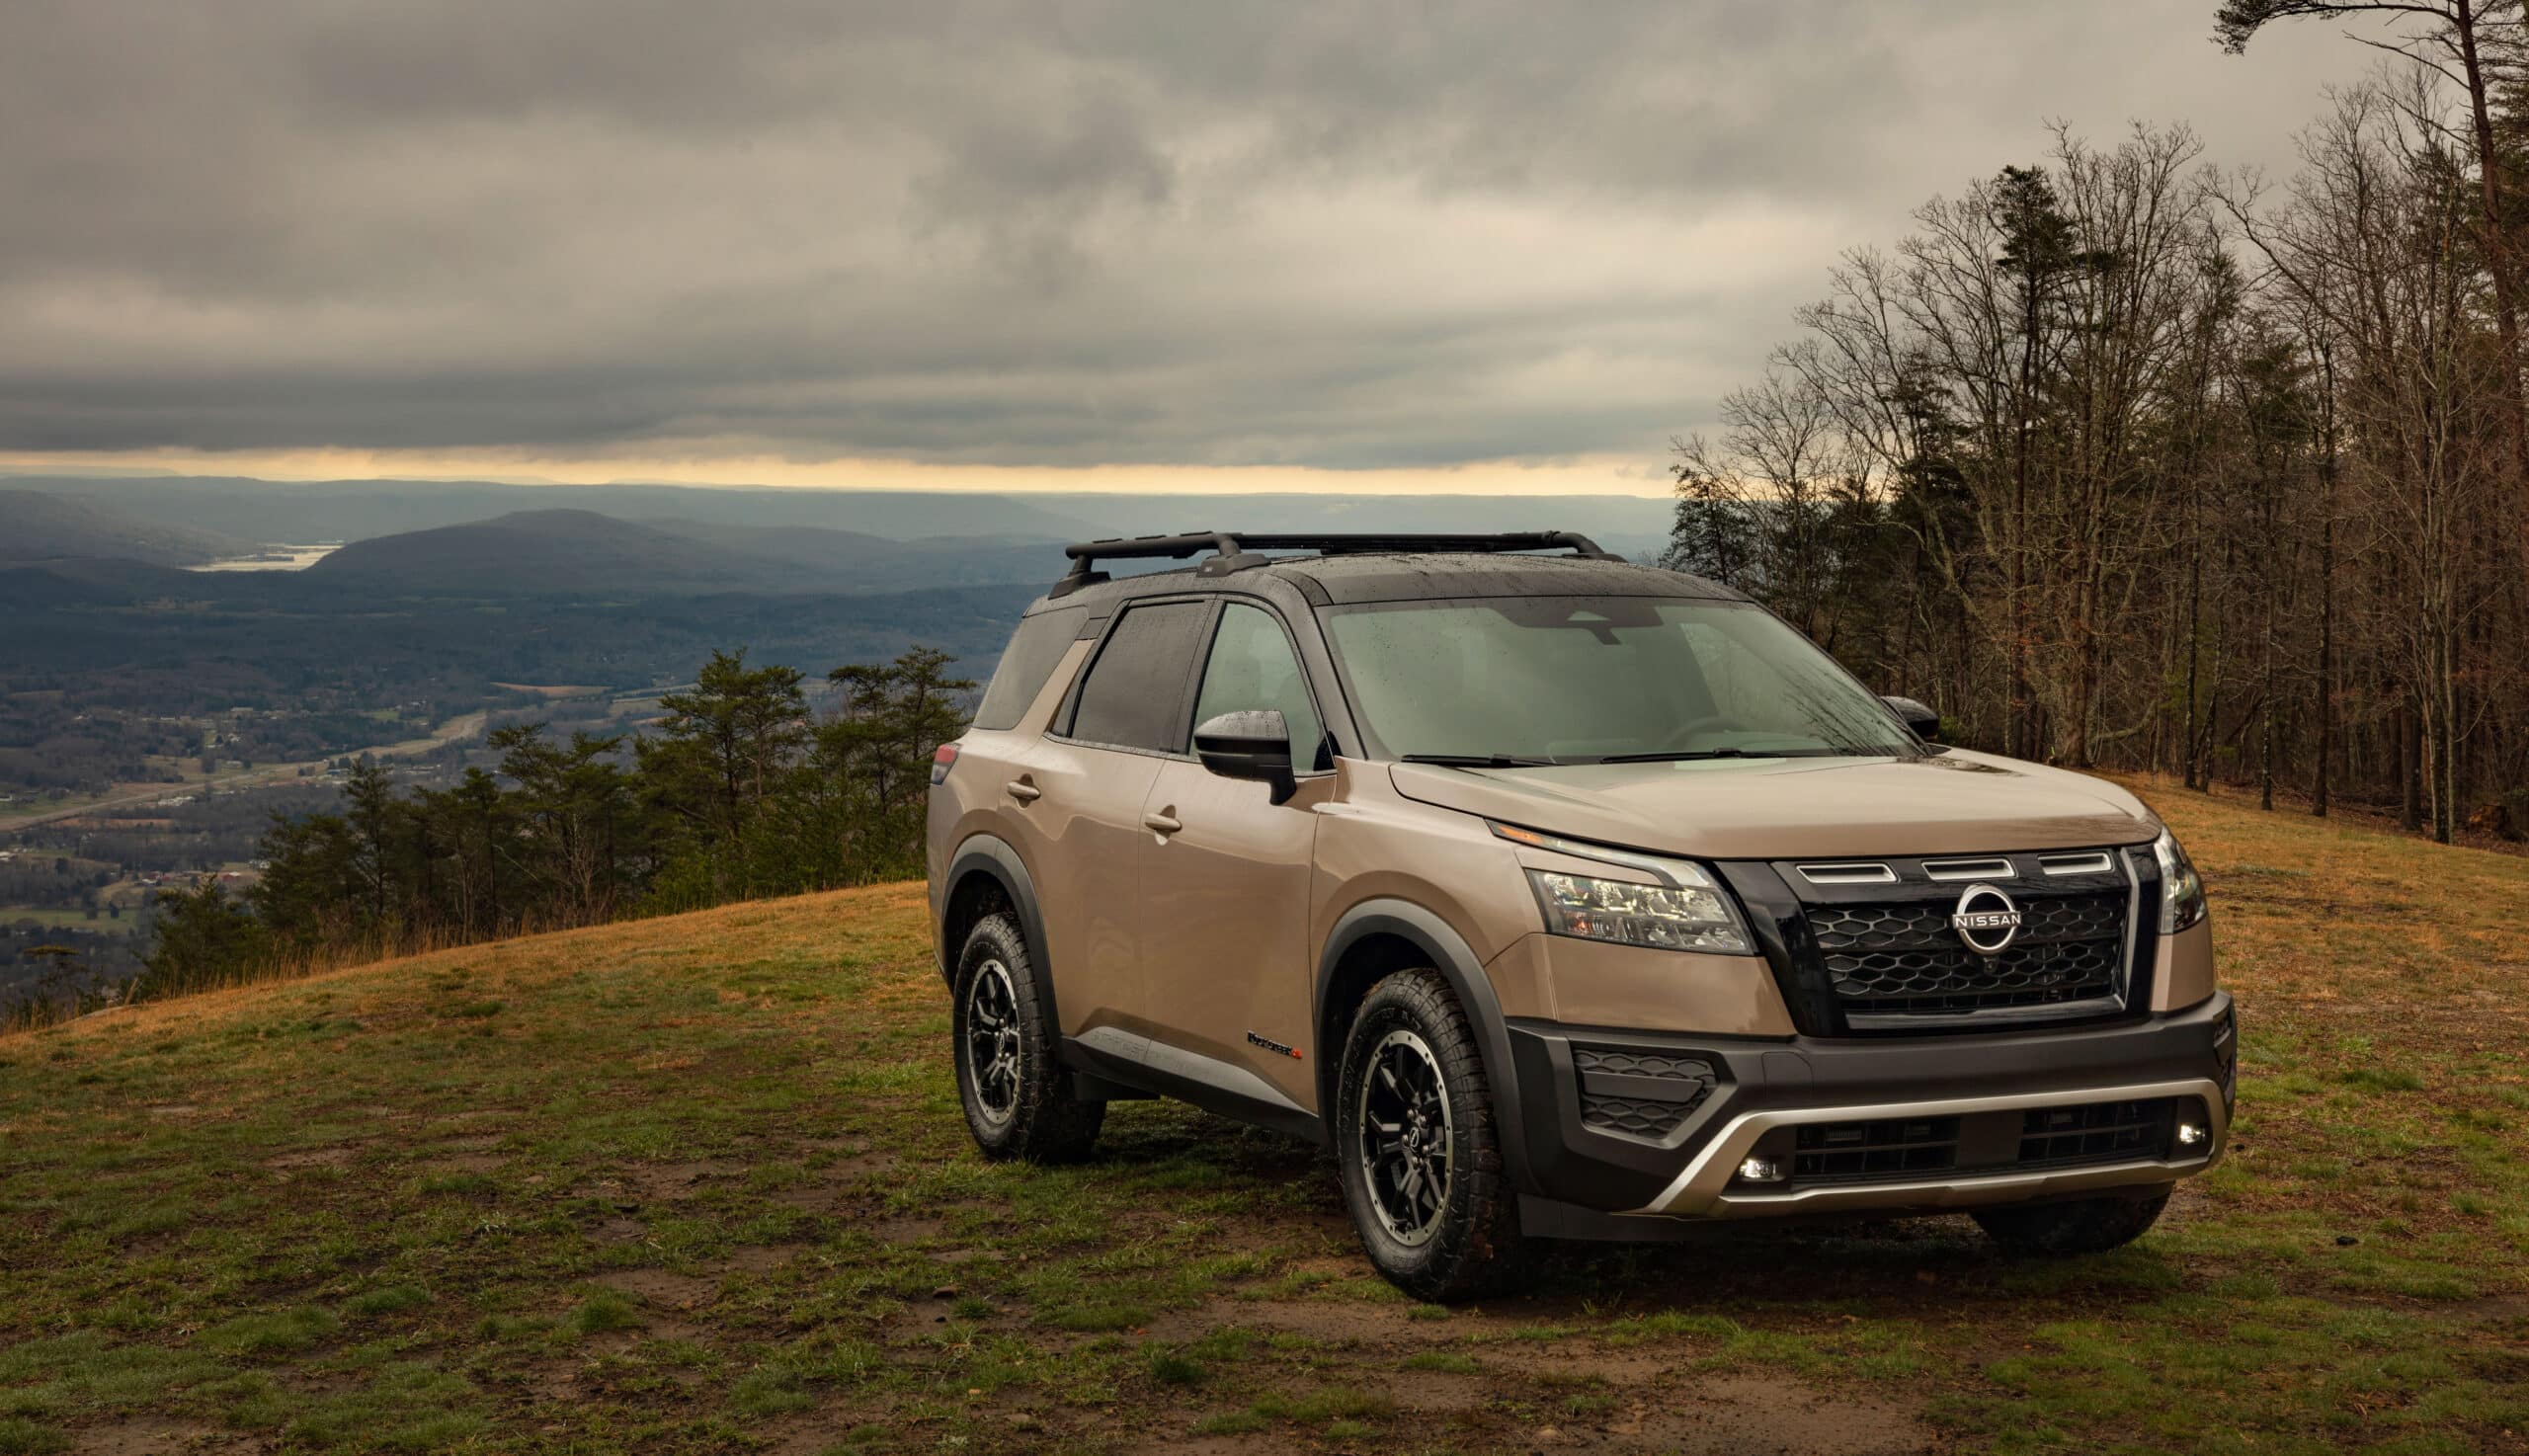 The 2023 Nissan Rock Creek is a solid mid-size SUV value